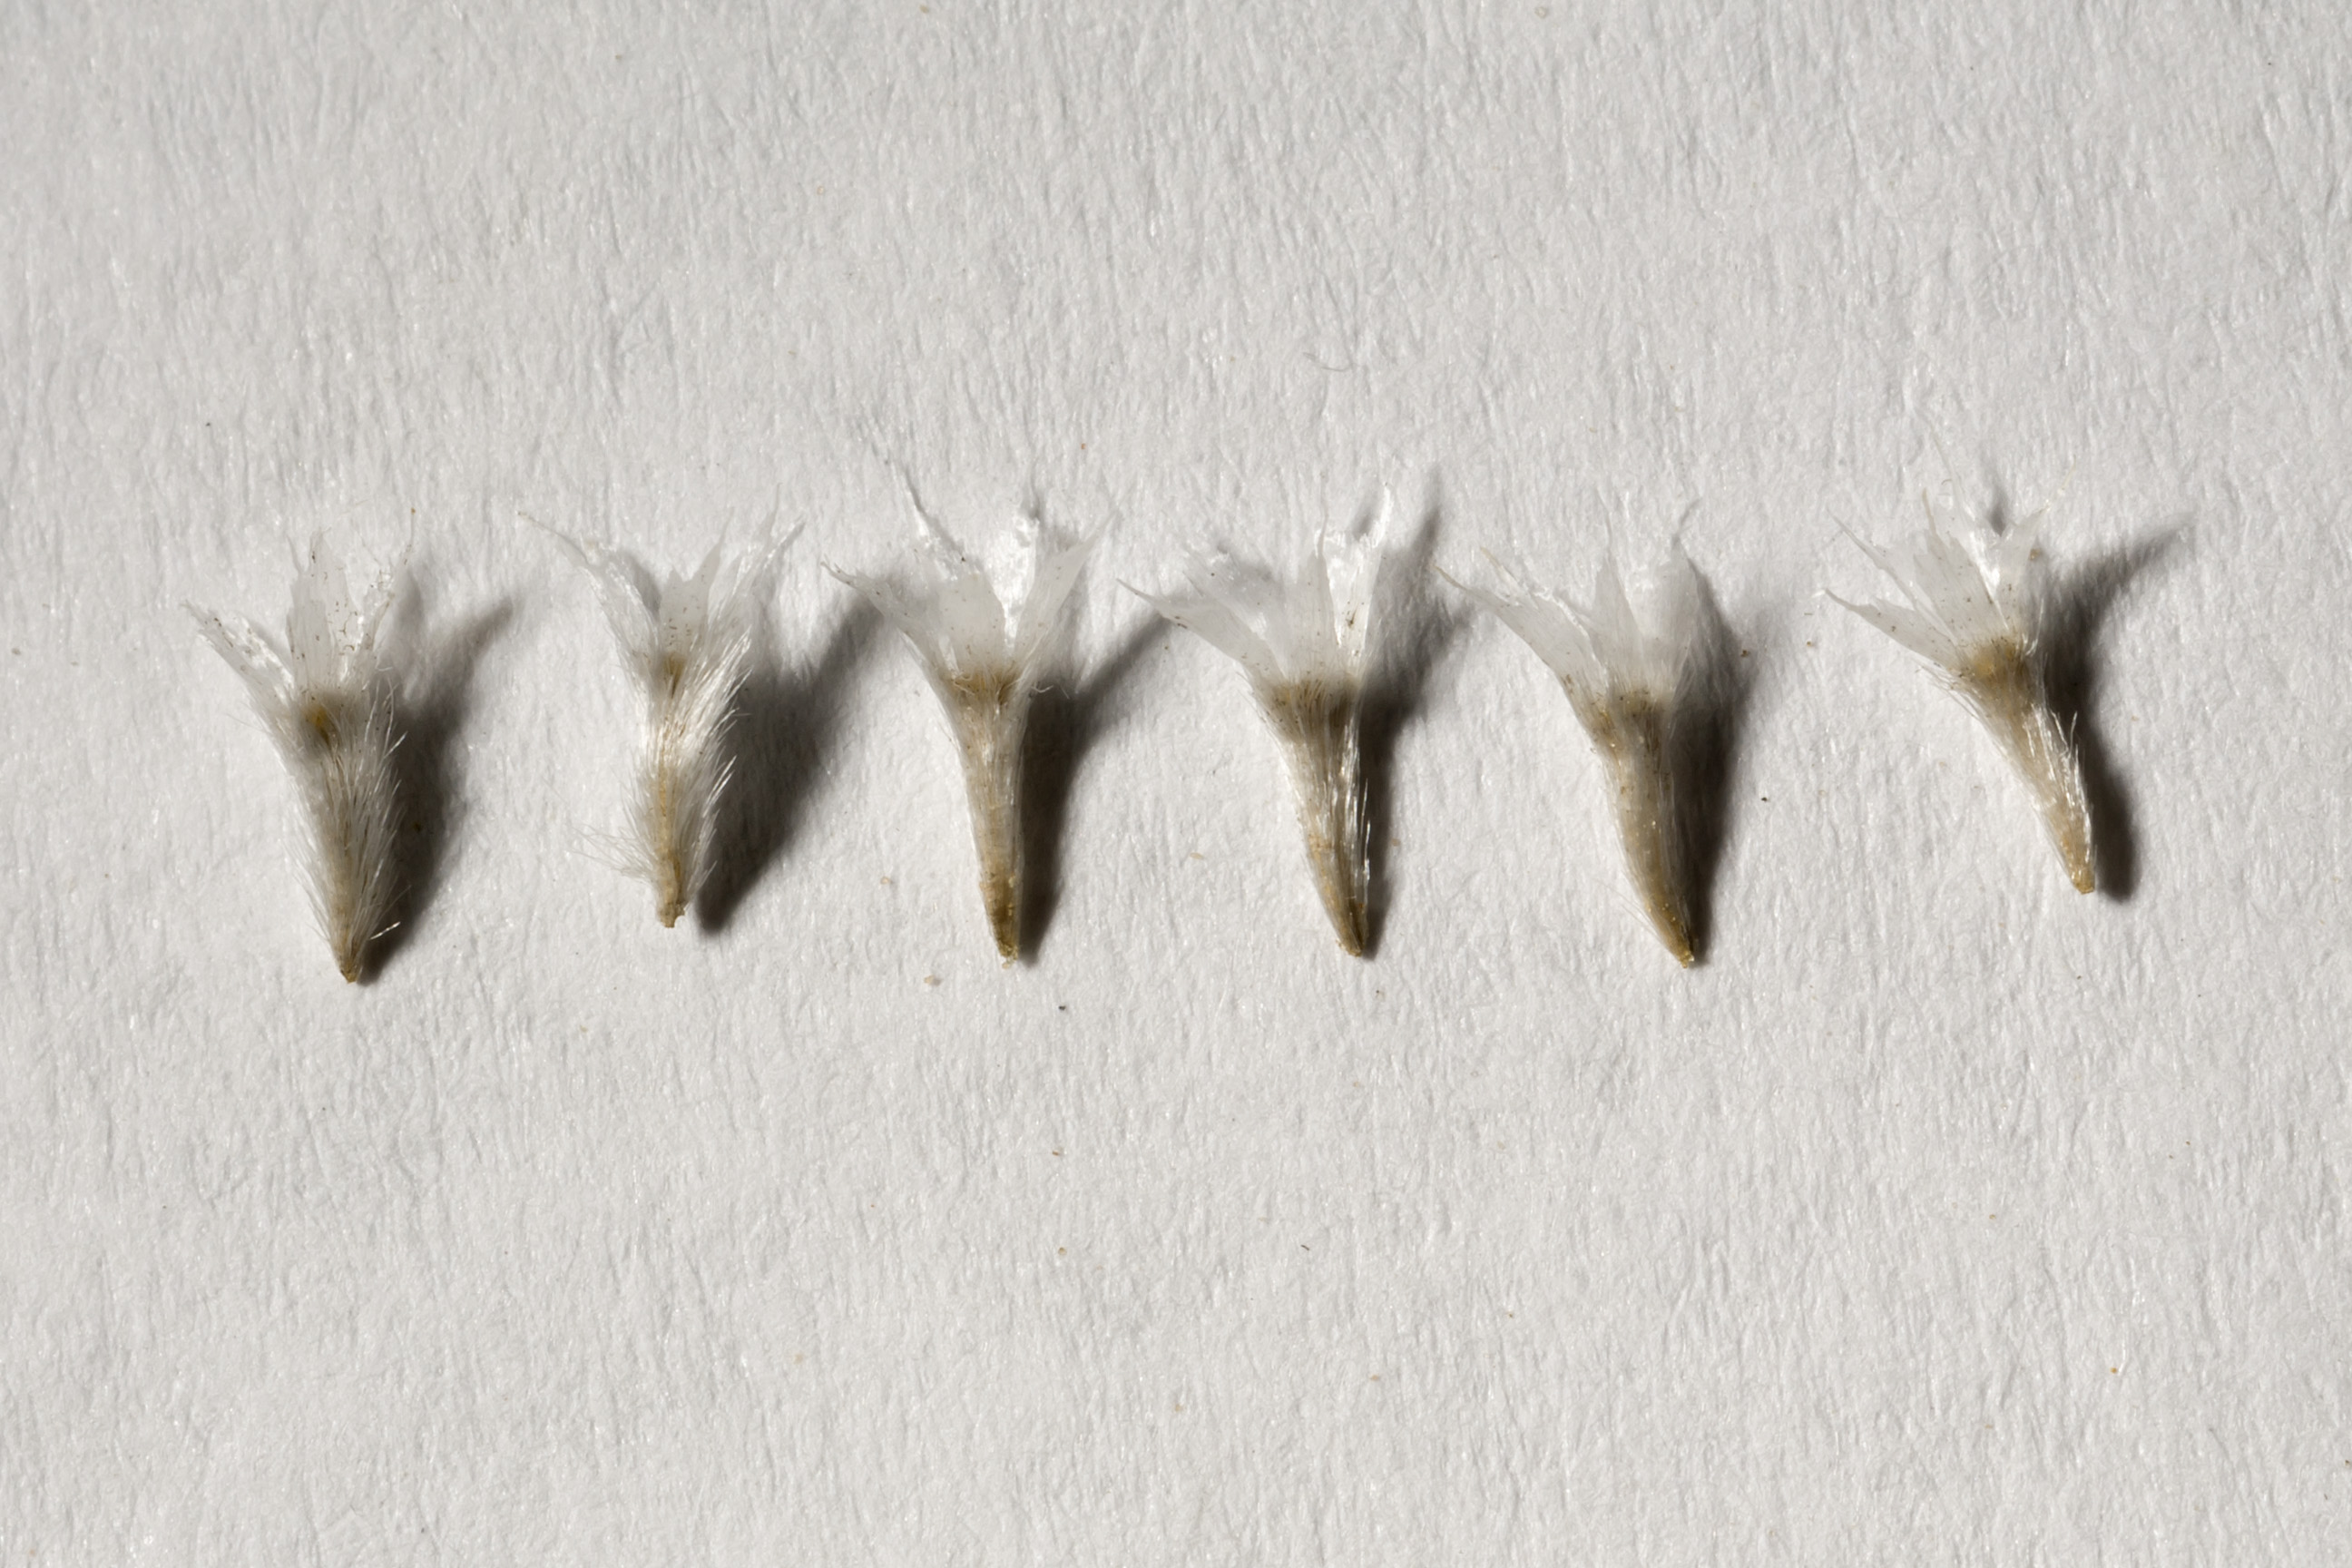 Seeds of Hymenoxys richardsonii showing fuzzy surface and tufted ends